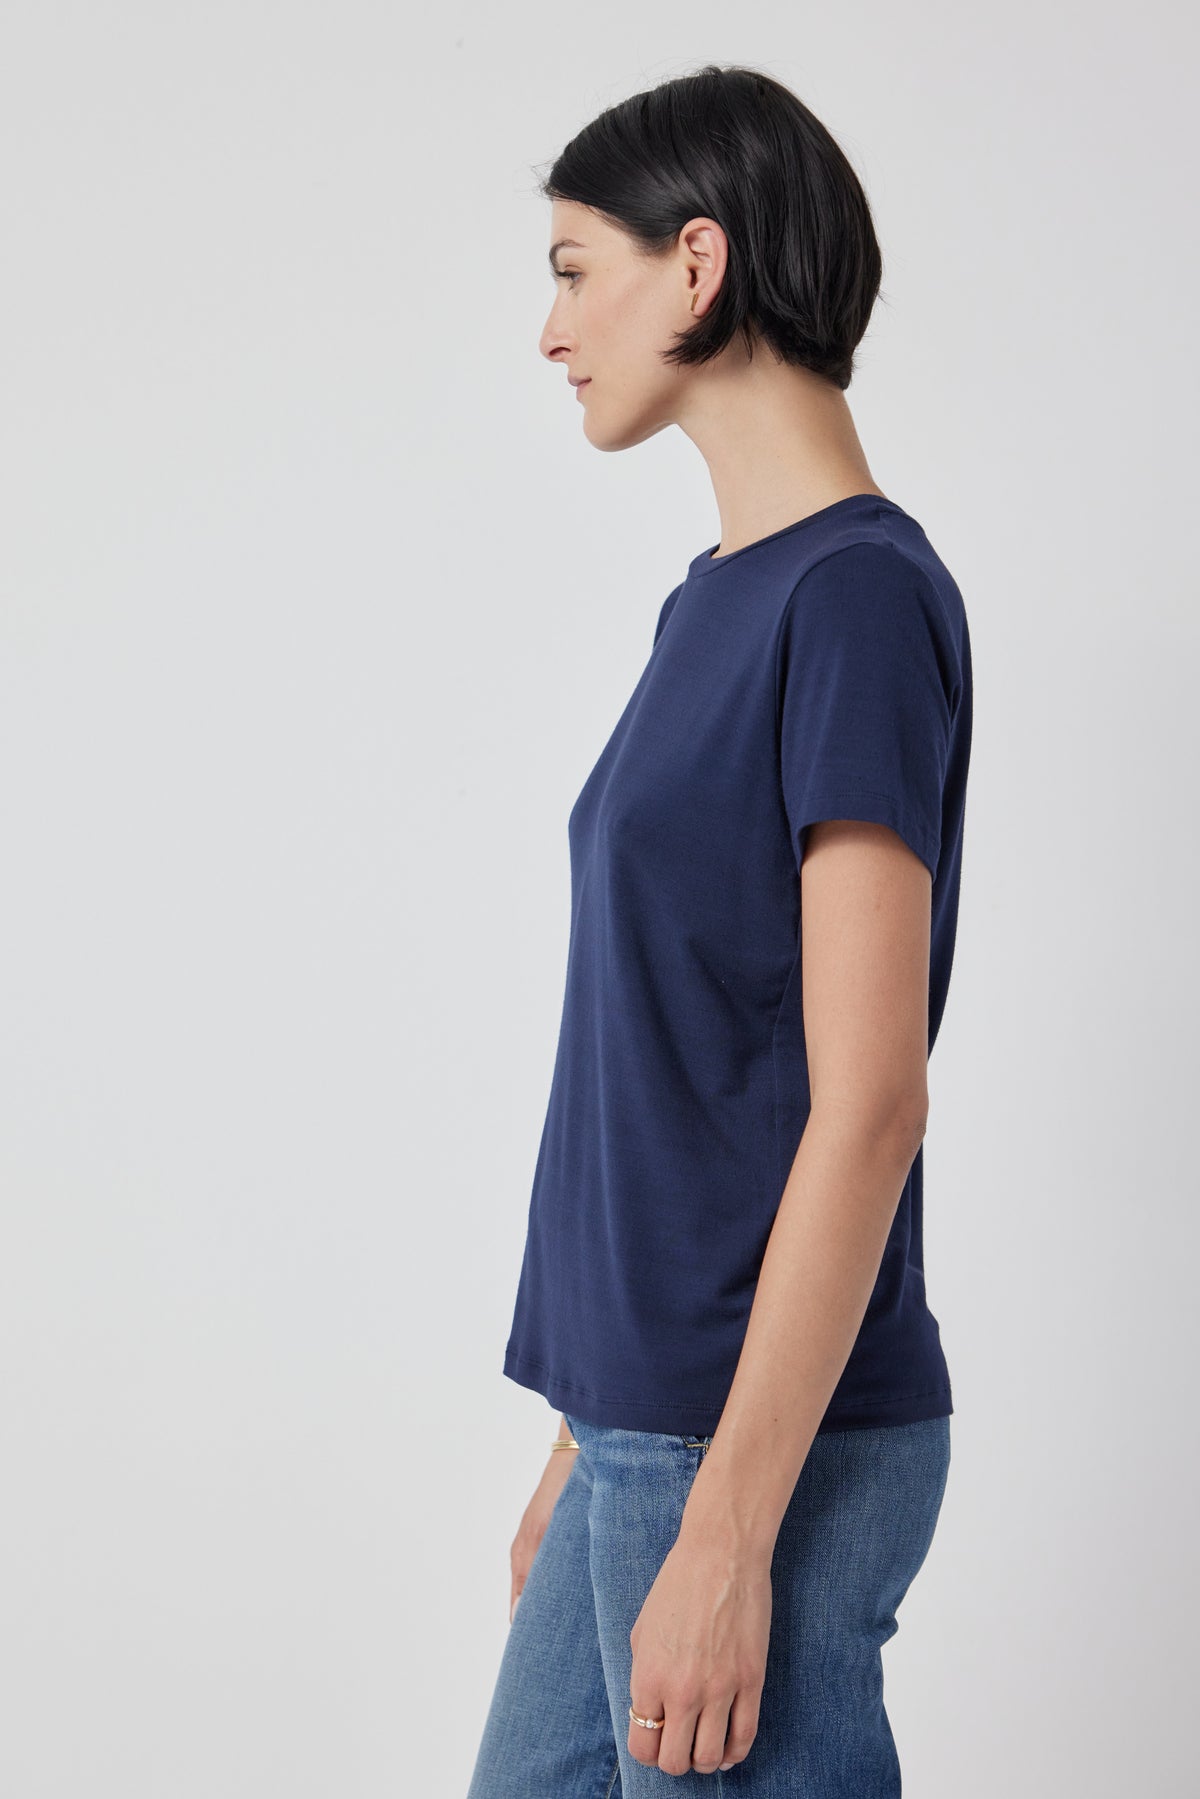 Profile view of a woman wearing a navy blue Velvet by Jenny Graham Solana Tee and jeans against a white background.-36463663874241